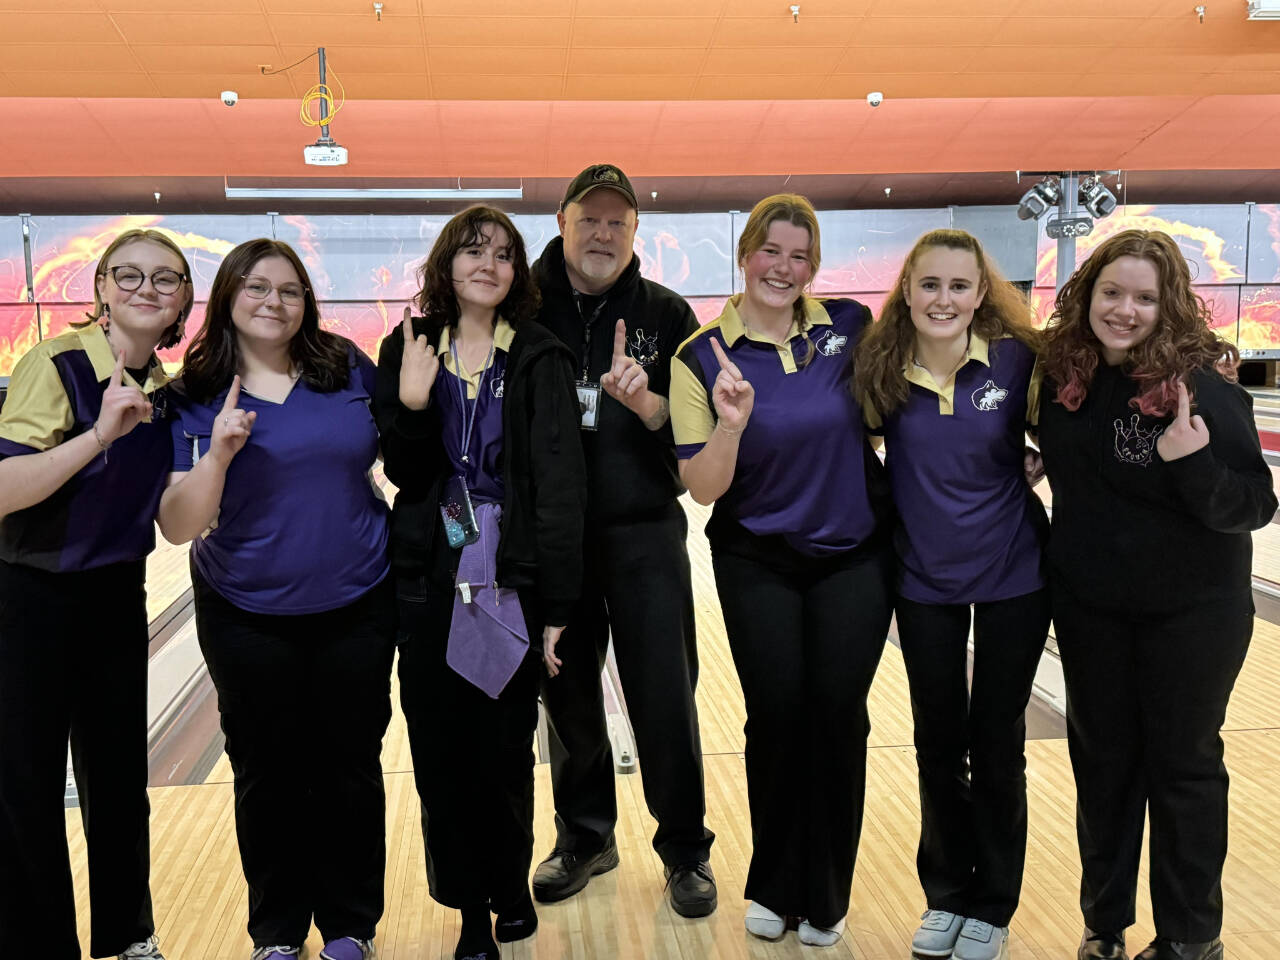 Photo courtesy of Randy Perry/Sequim Wolves Bowling
League champs! Sequim High School’s bowling team celebrates the program’s first Olympic League title on Jan. 18 in Silverdale. Pictured, from left, are Kimberly Heintz, Morgan Kayser, Victoria Nava, head coach Randy Perry, Skylar Kryzworz, Nikoline Updike and Cooper Hiatt.